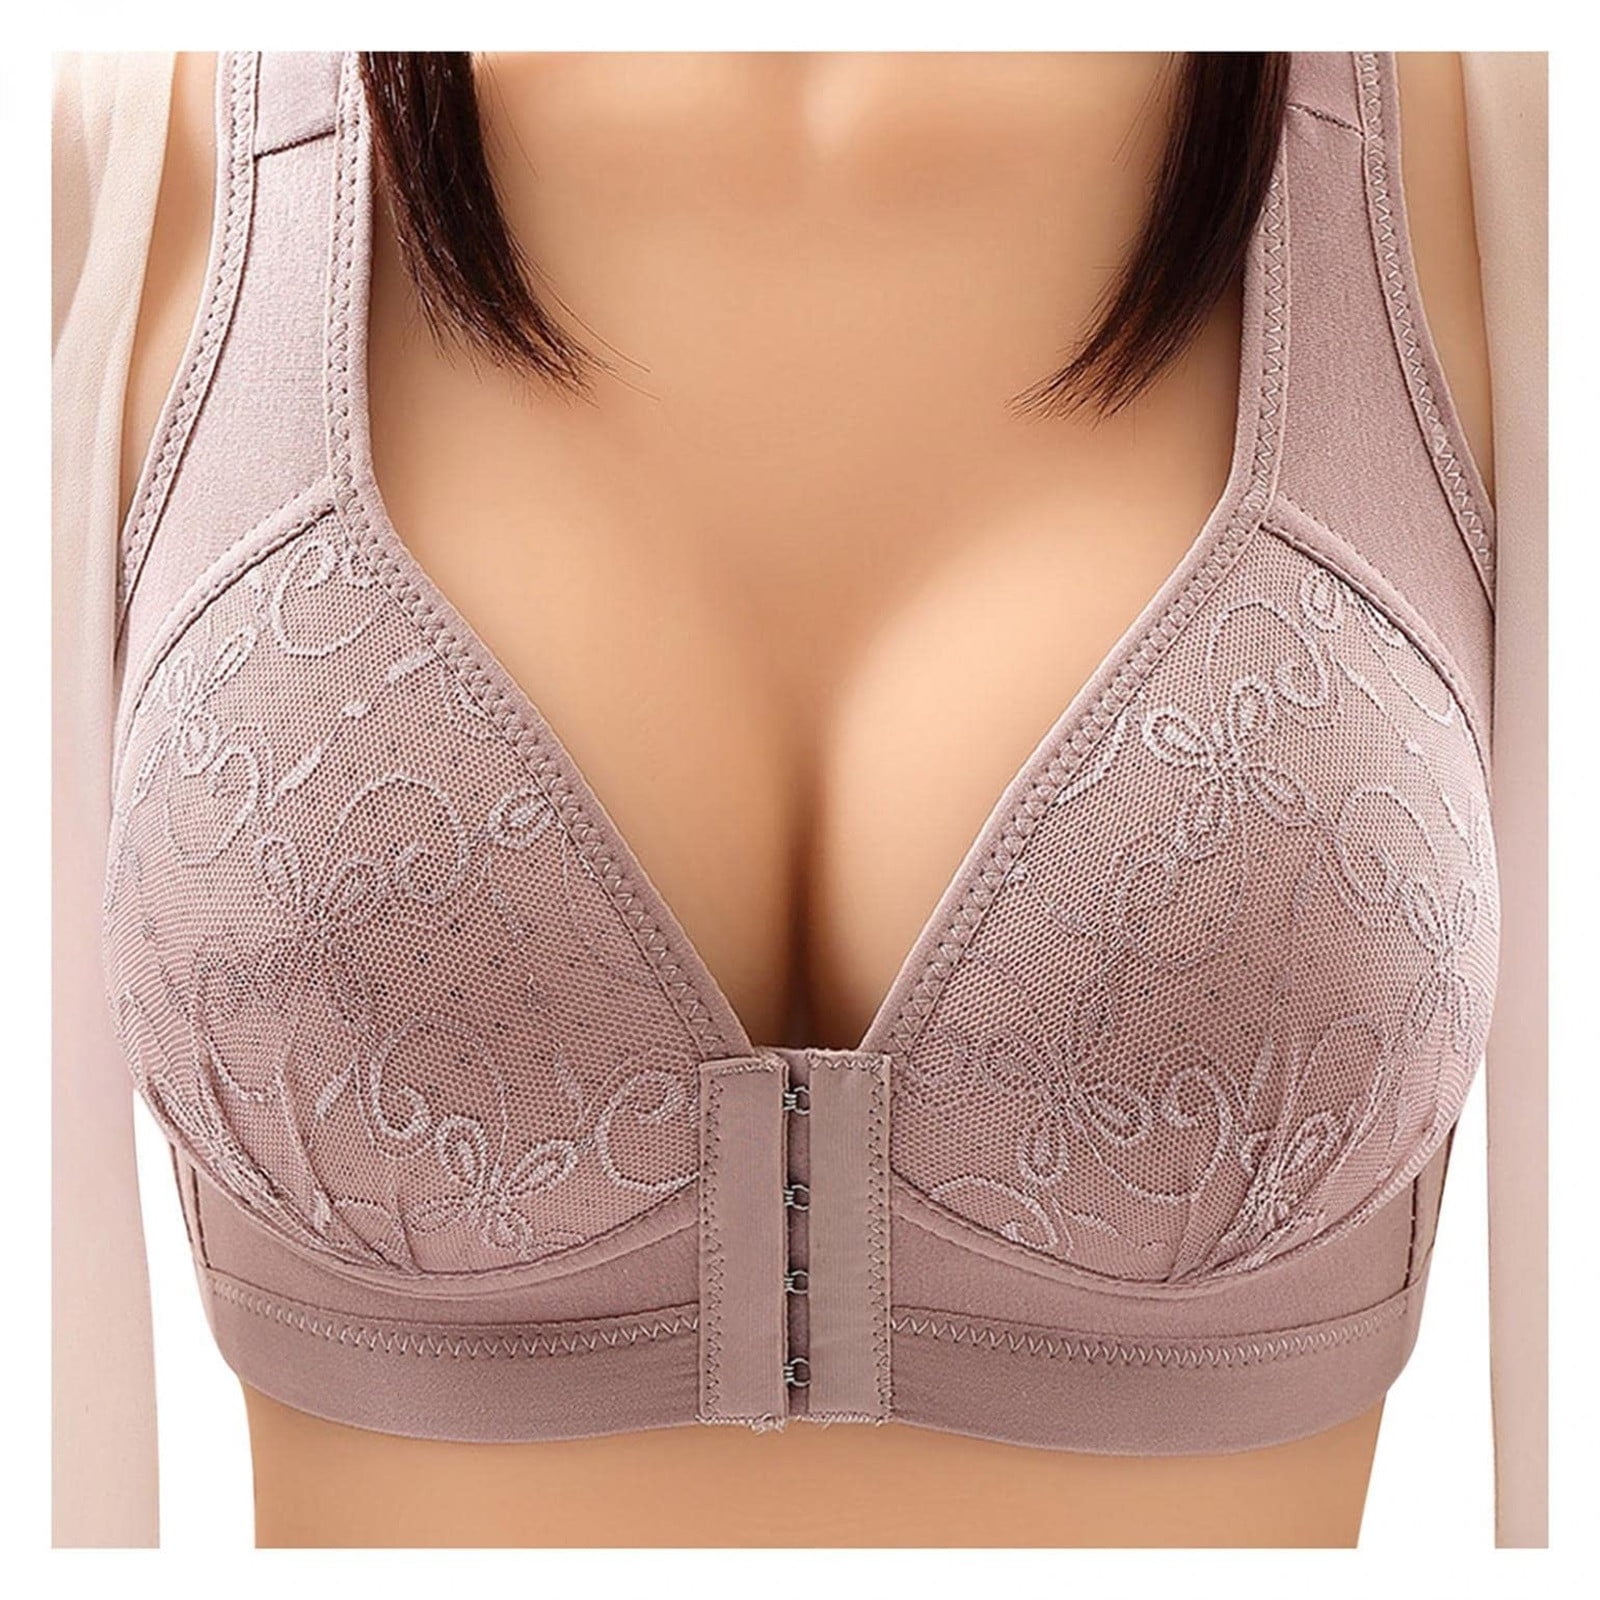 FAFWYP Women's Plus Size Front Closure Wireless Bras for Large